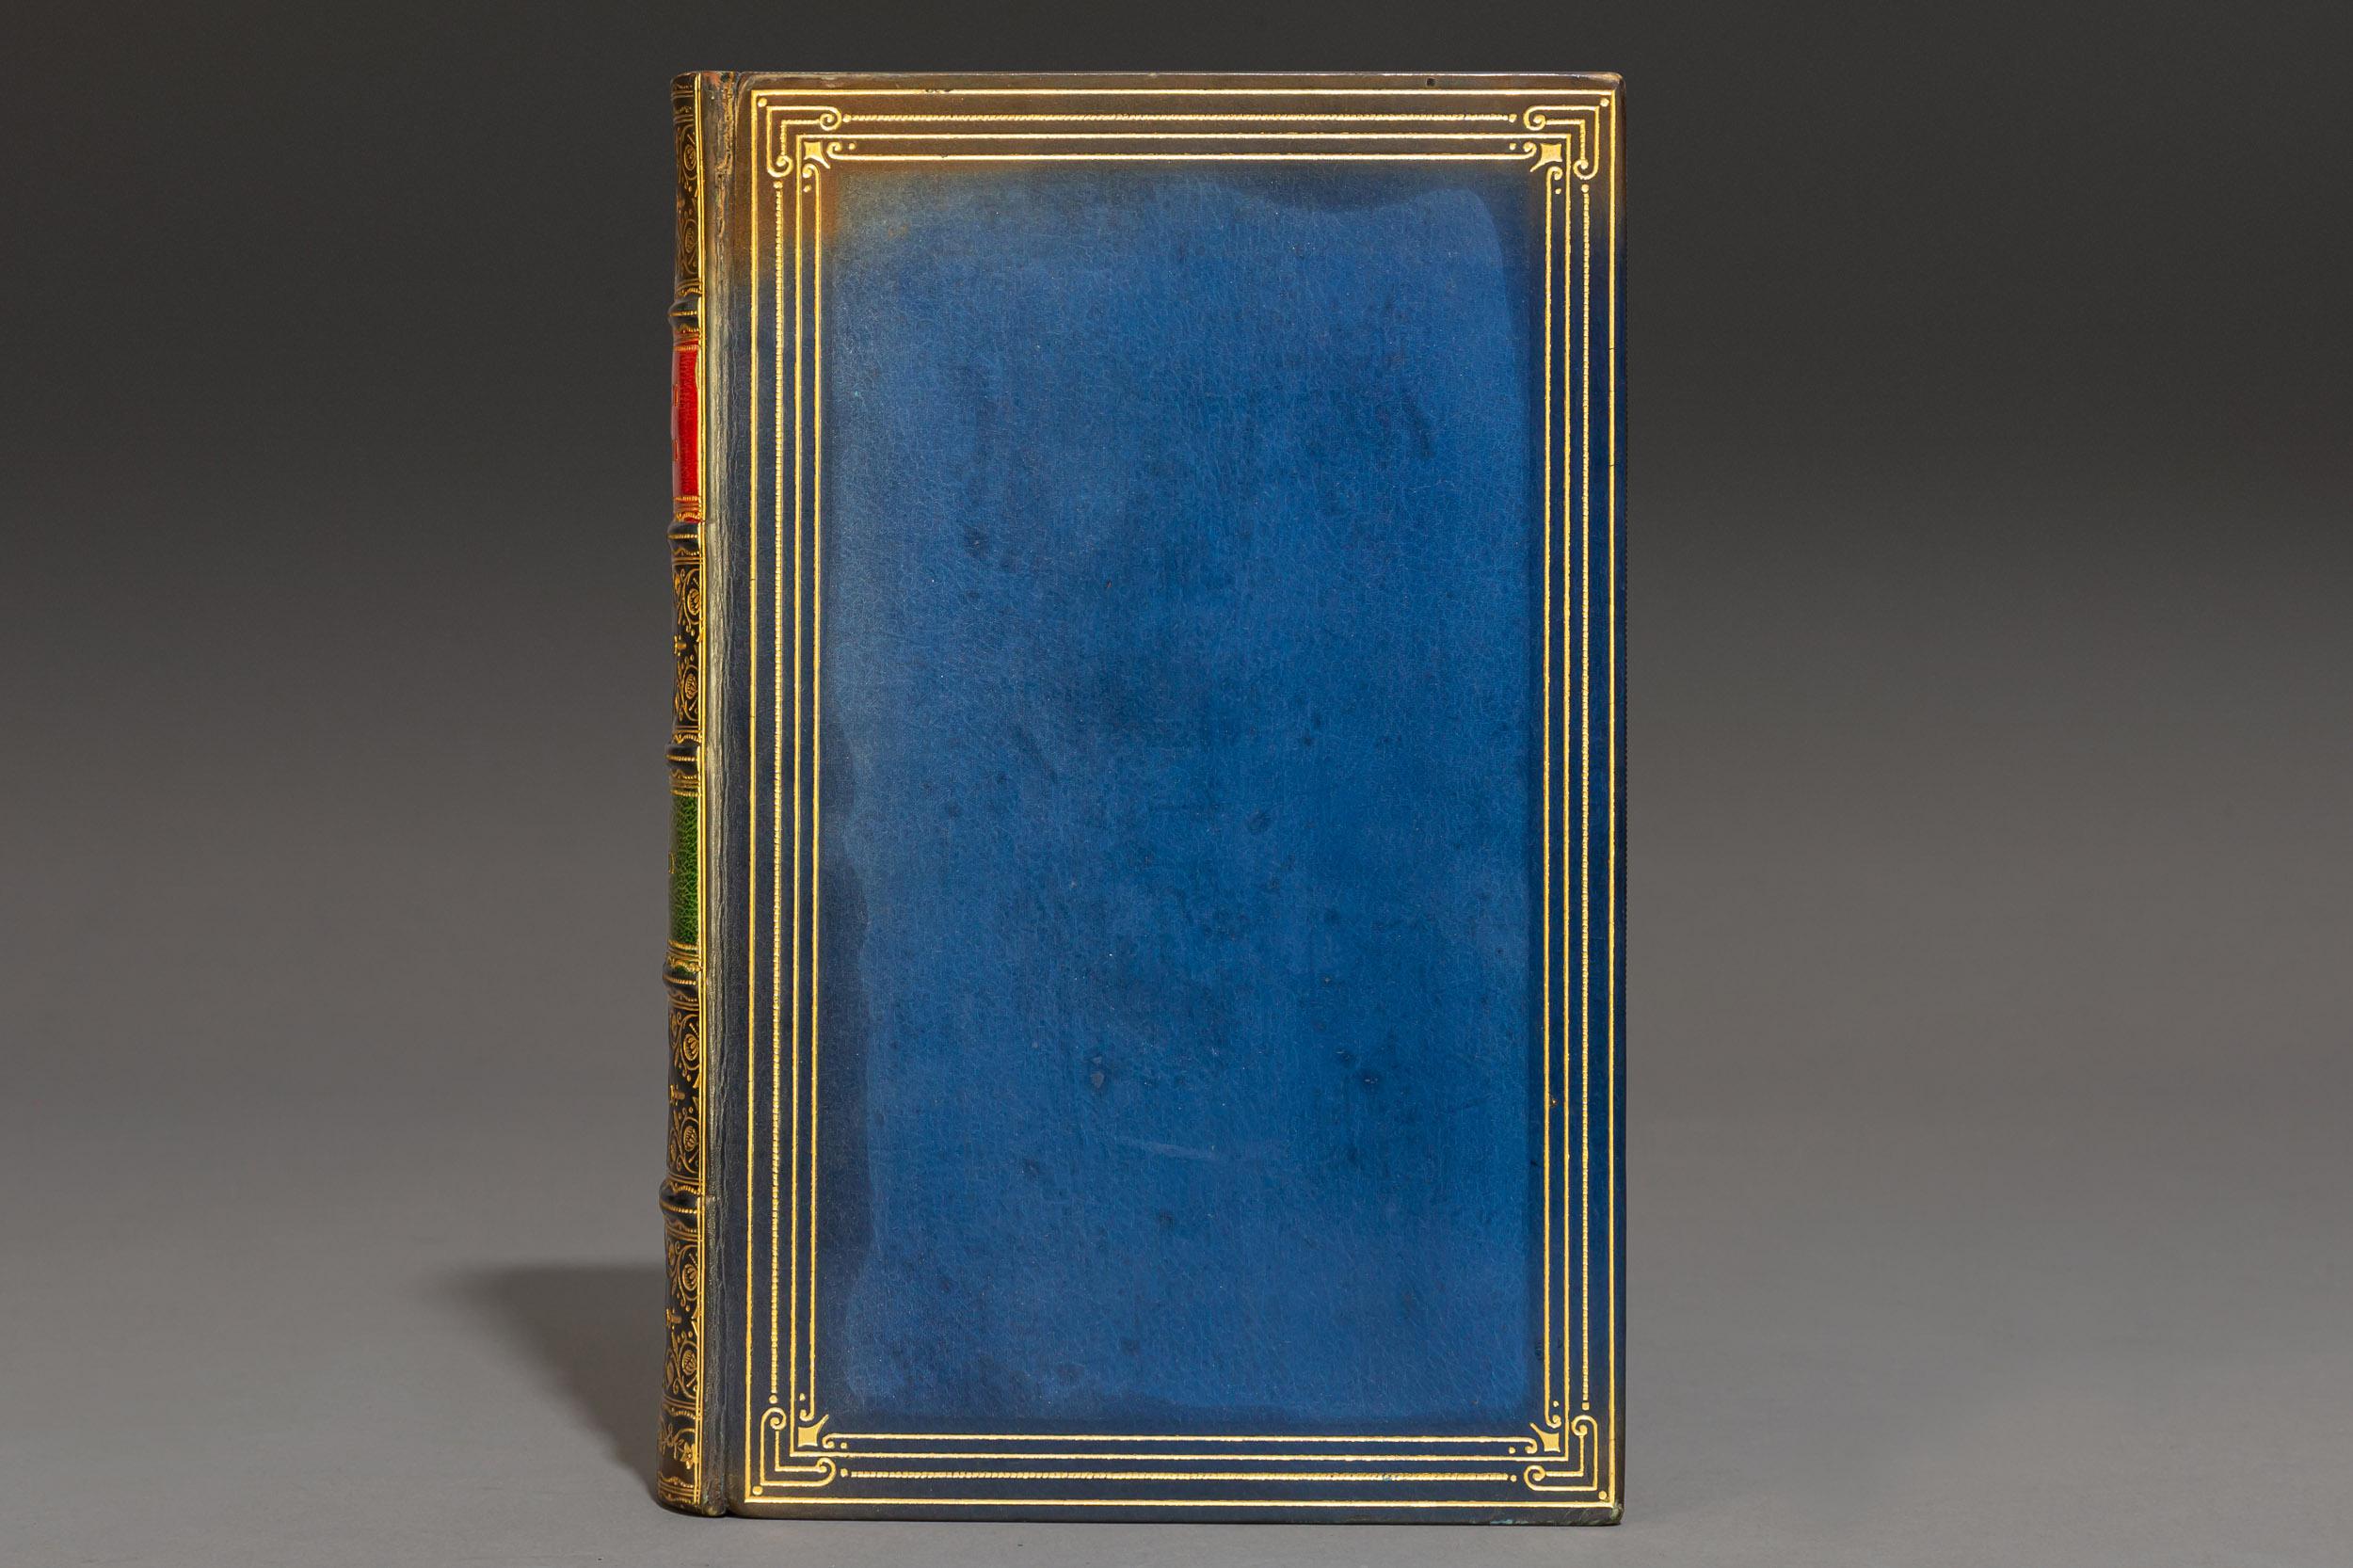 1 Volume. Sir Thomas Malory. LeMorte D'Arthur. Illustrated with color plates by Russell Flint. Bound In Full
Blue Polished Calf By Riviere, All Edges Gilt, Raised Bands, Ornate Gilt On Spines And Covers. Published:
London: Medici Society Ltd. 1929.